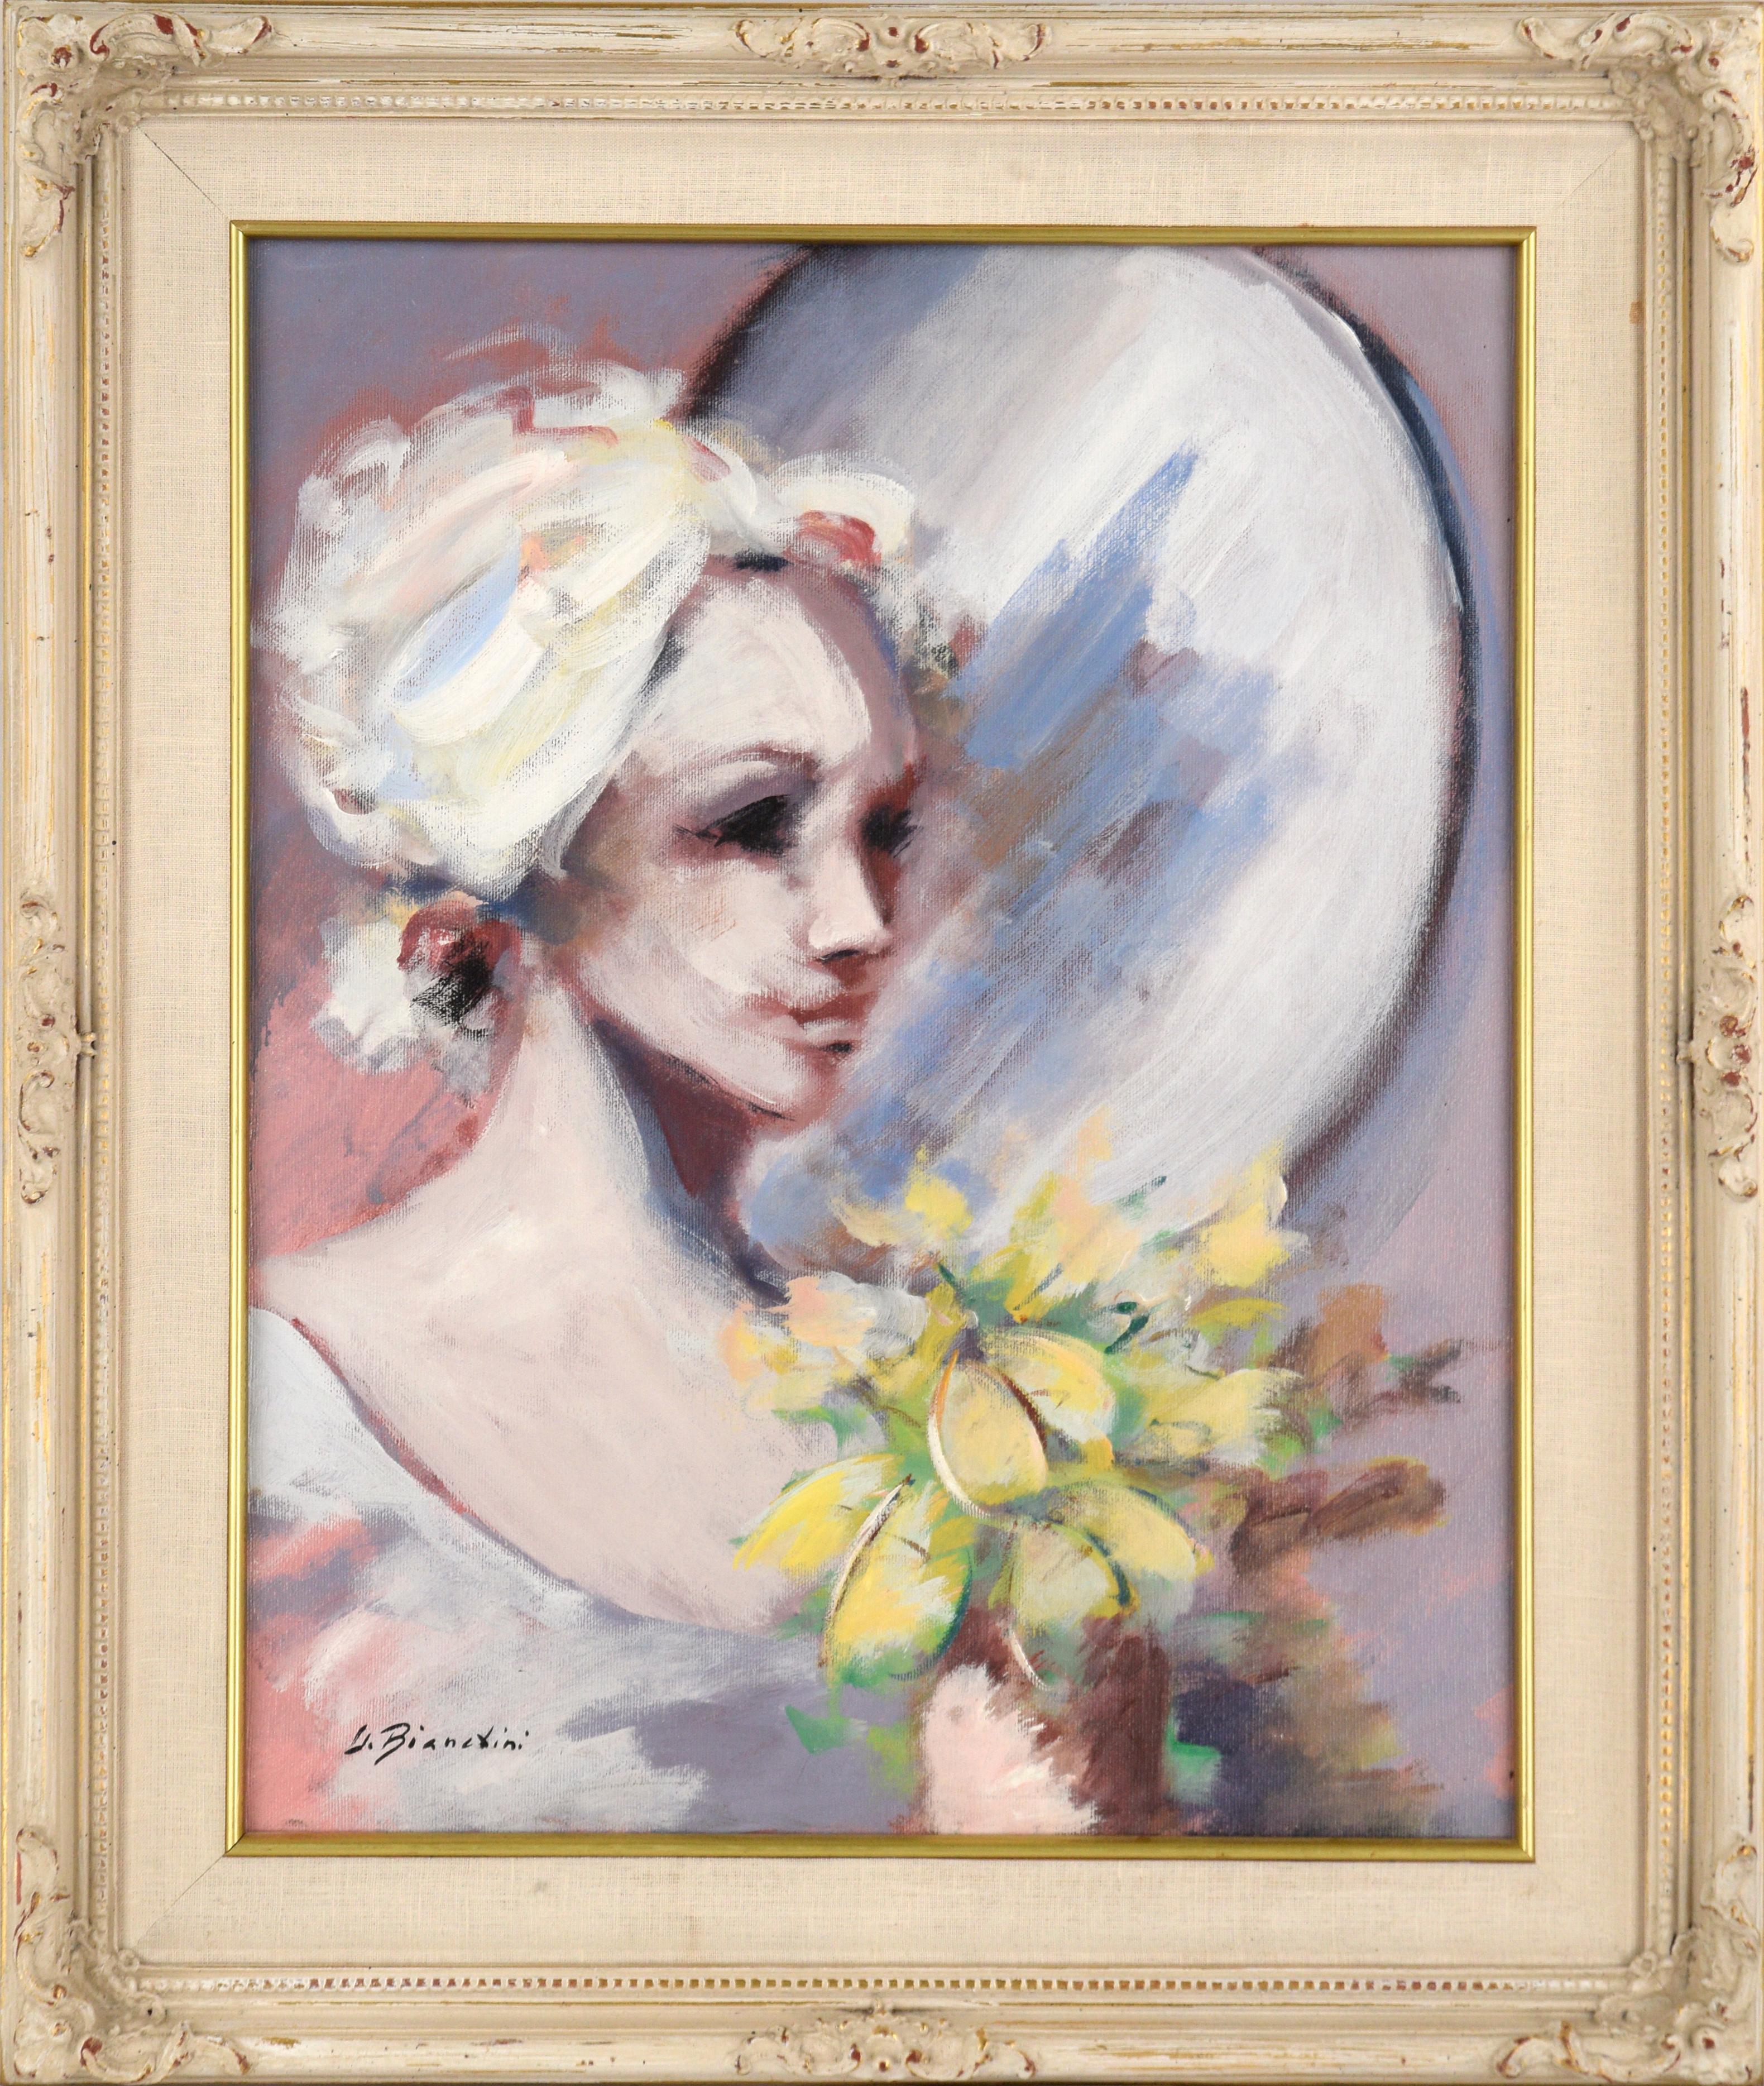 Umberto Bianchini Portrait Painting - Woman with a Bouquet by the Mirror